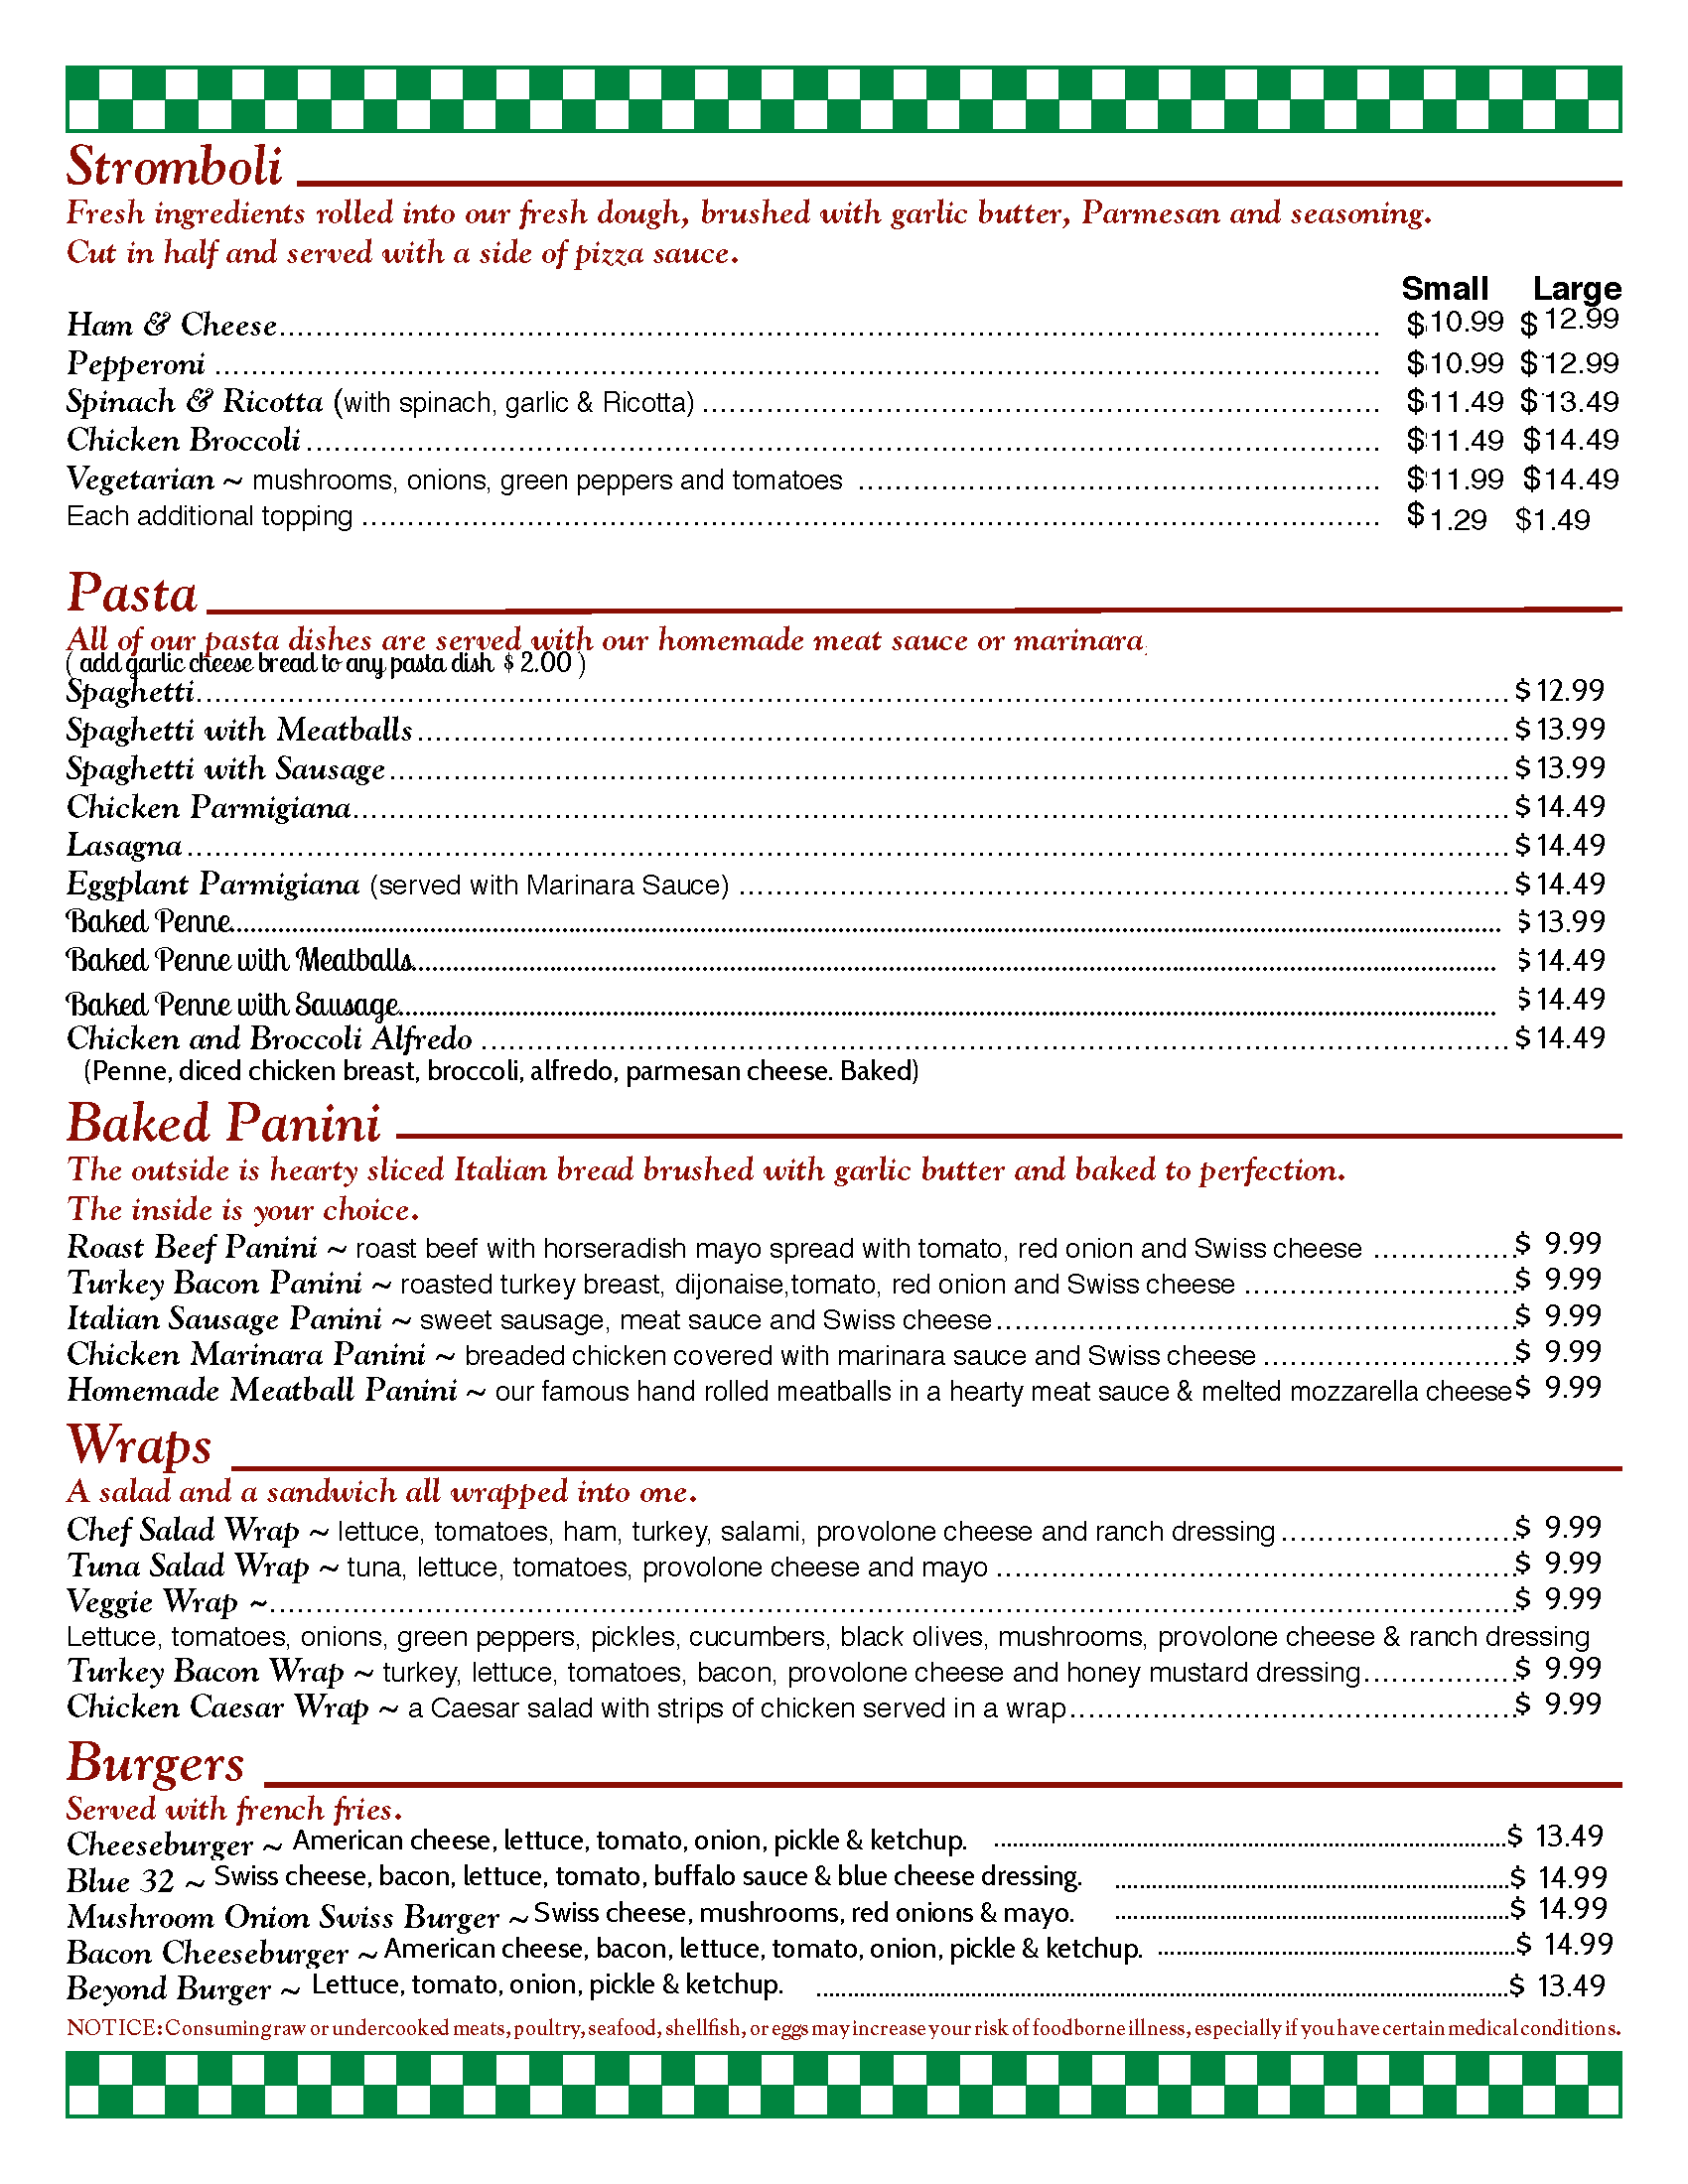 Hoagie's pizza and pasta menu page 2